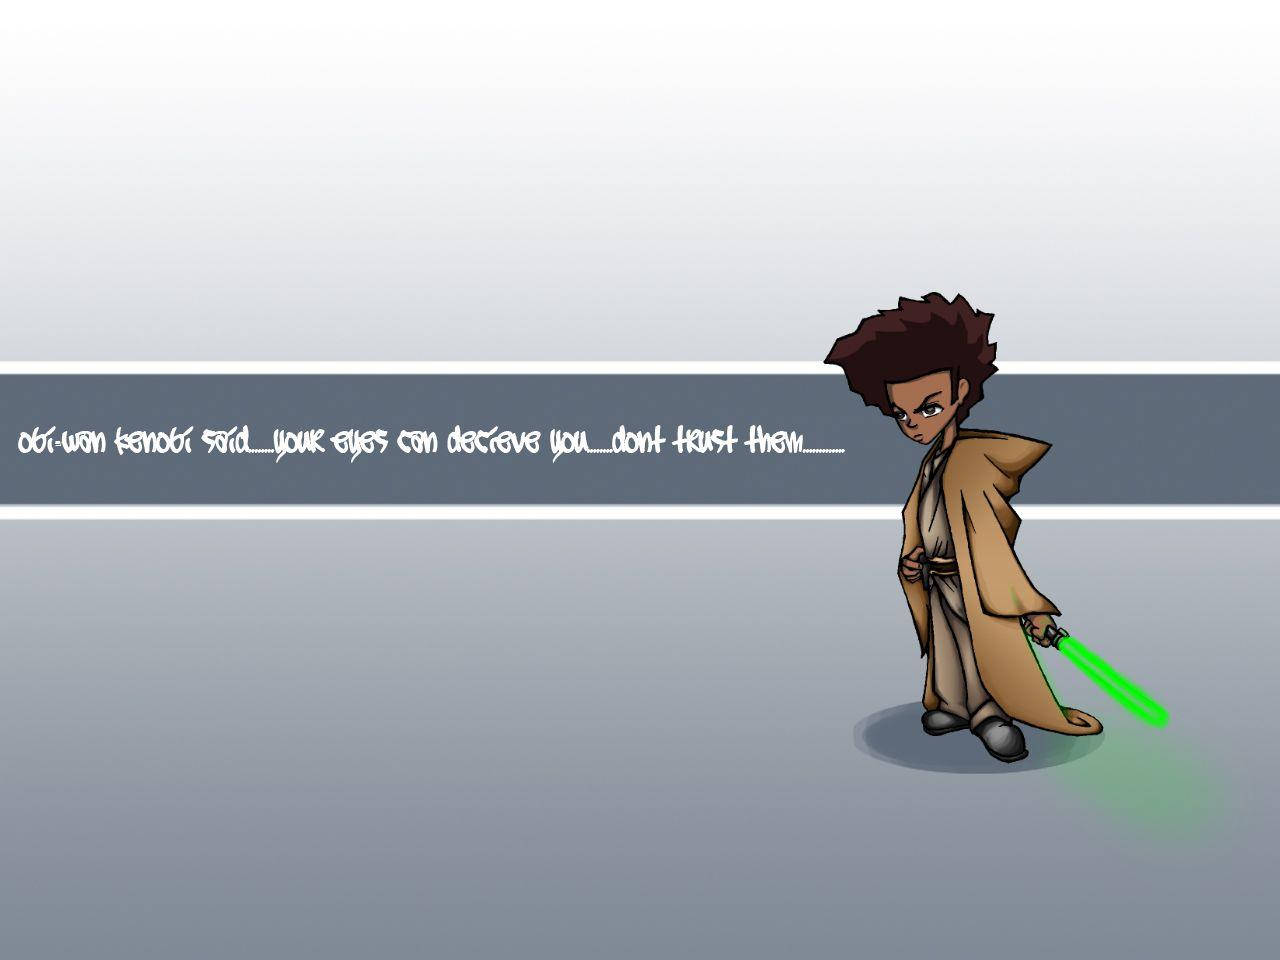 Huey Freeman Stands Tall In His Own Power.